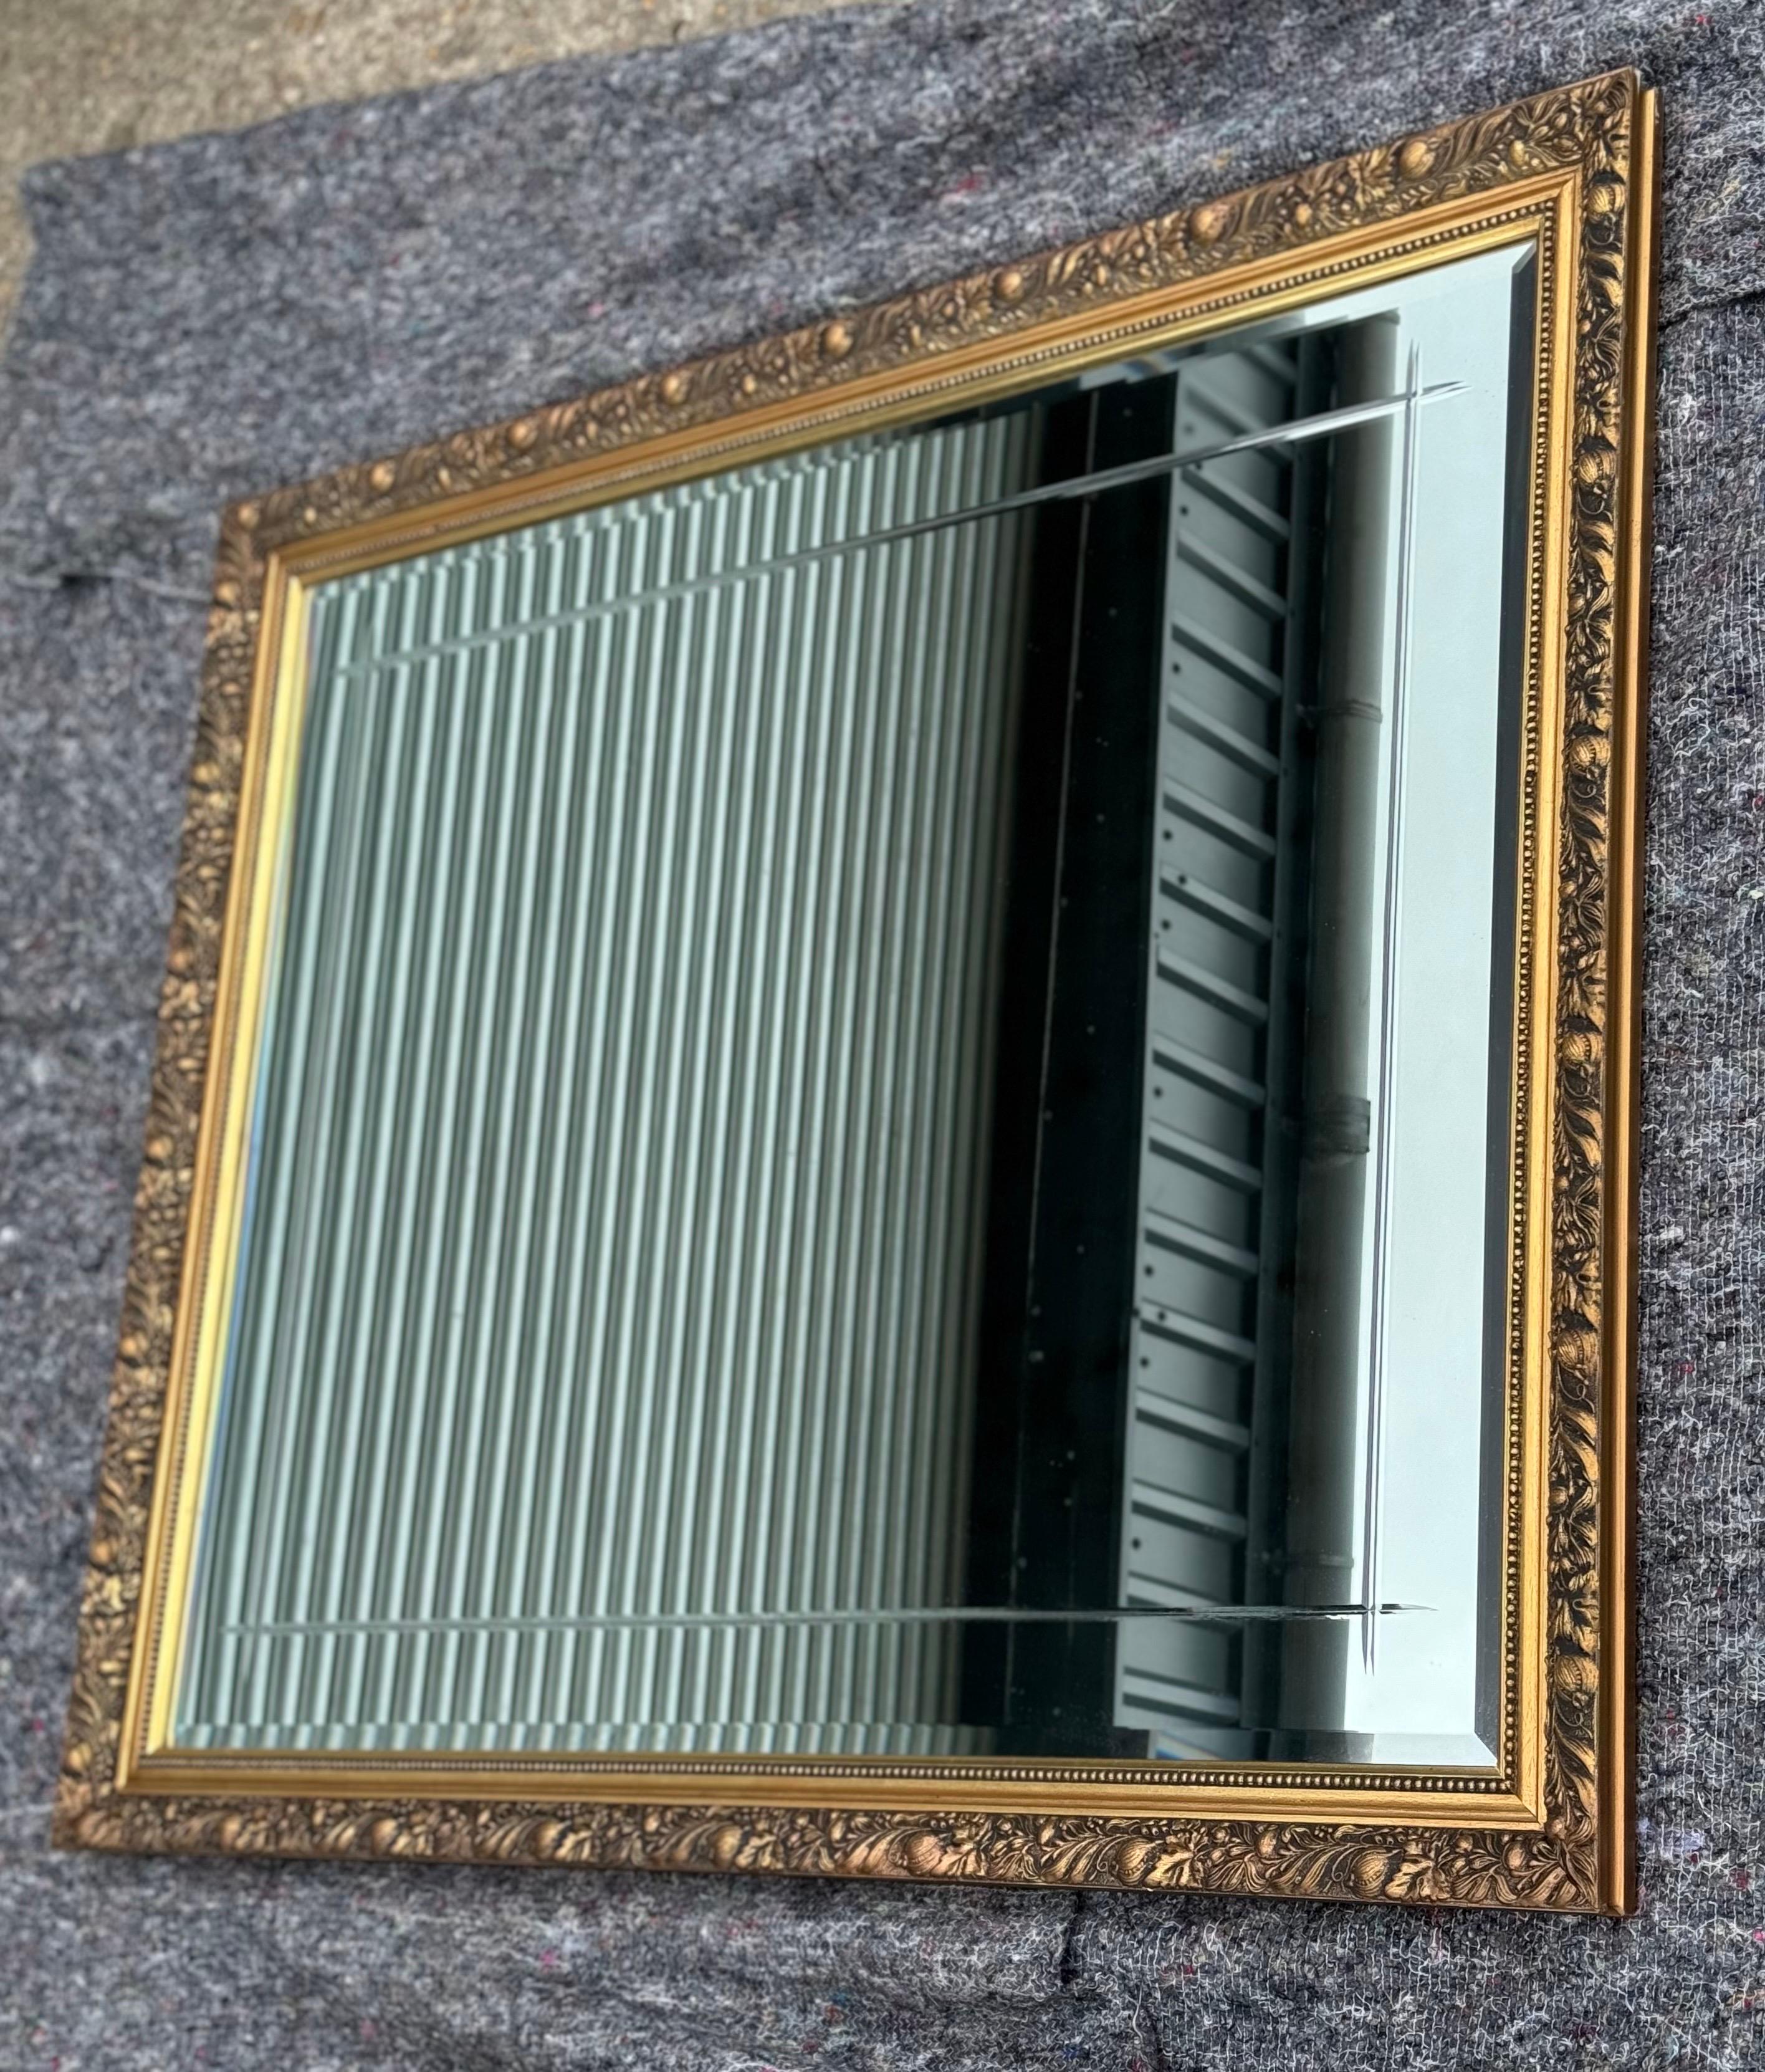 
We are delighted to offer for sale this Lovely Gold Ornate Bevelled Mirror. 

Please carefully examine the pictures to see the condition before purchasing, as they form part of the description. If you have any questions, please message us.